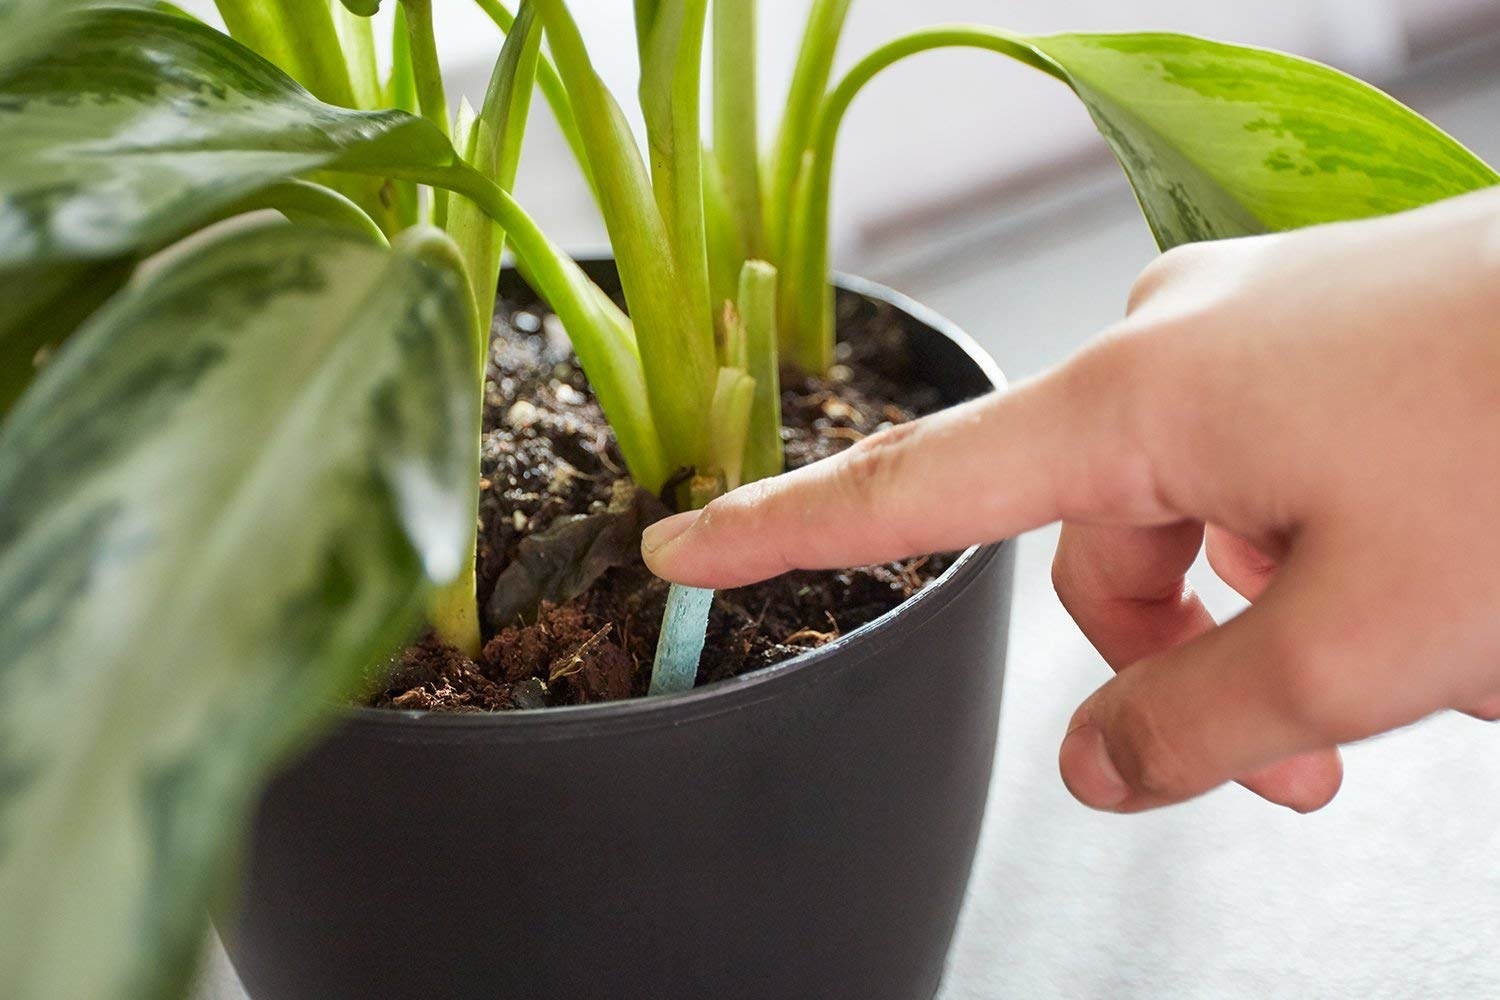 A model pushing a small pellet into a potted plant 